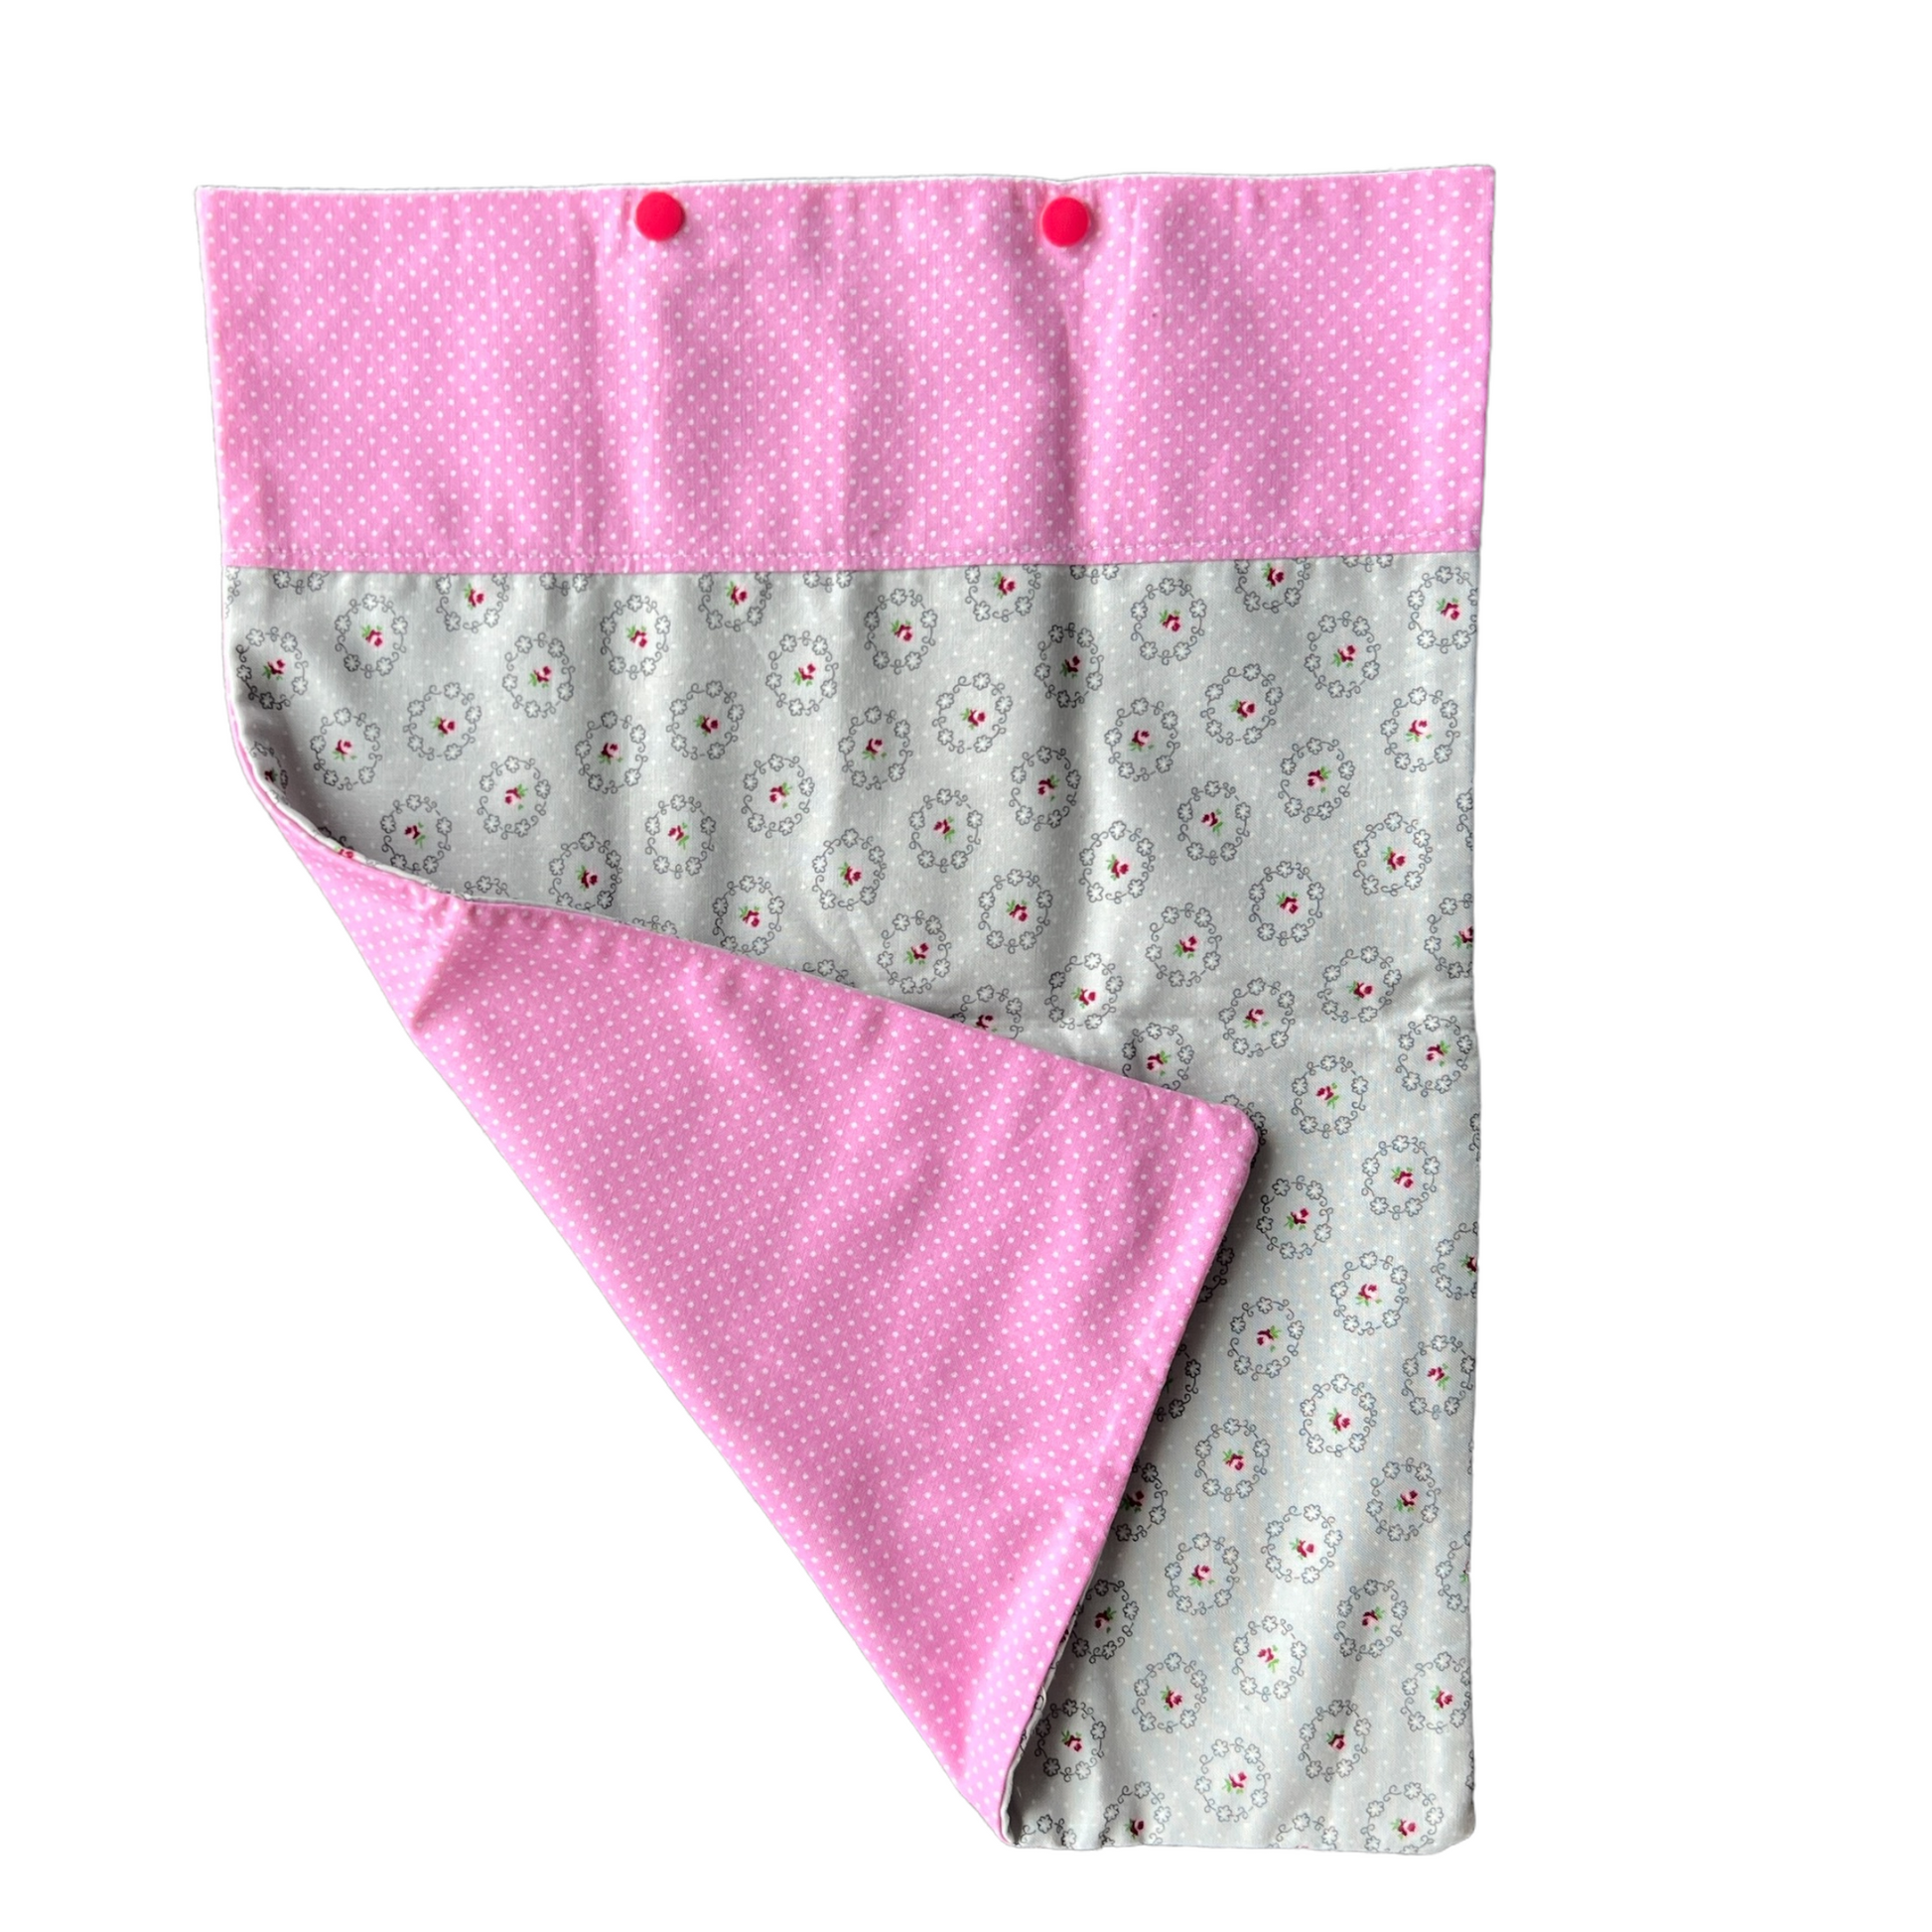 Reusable Cotton Nappy Bags  Splash Quilting Pink Polka Dot and Floral  